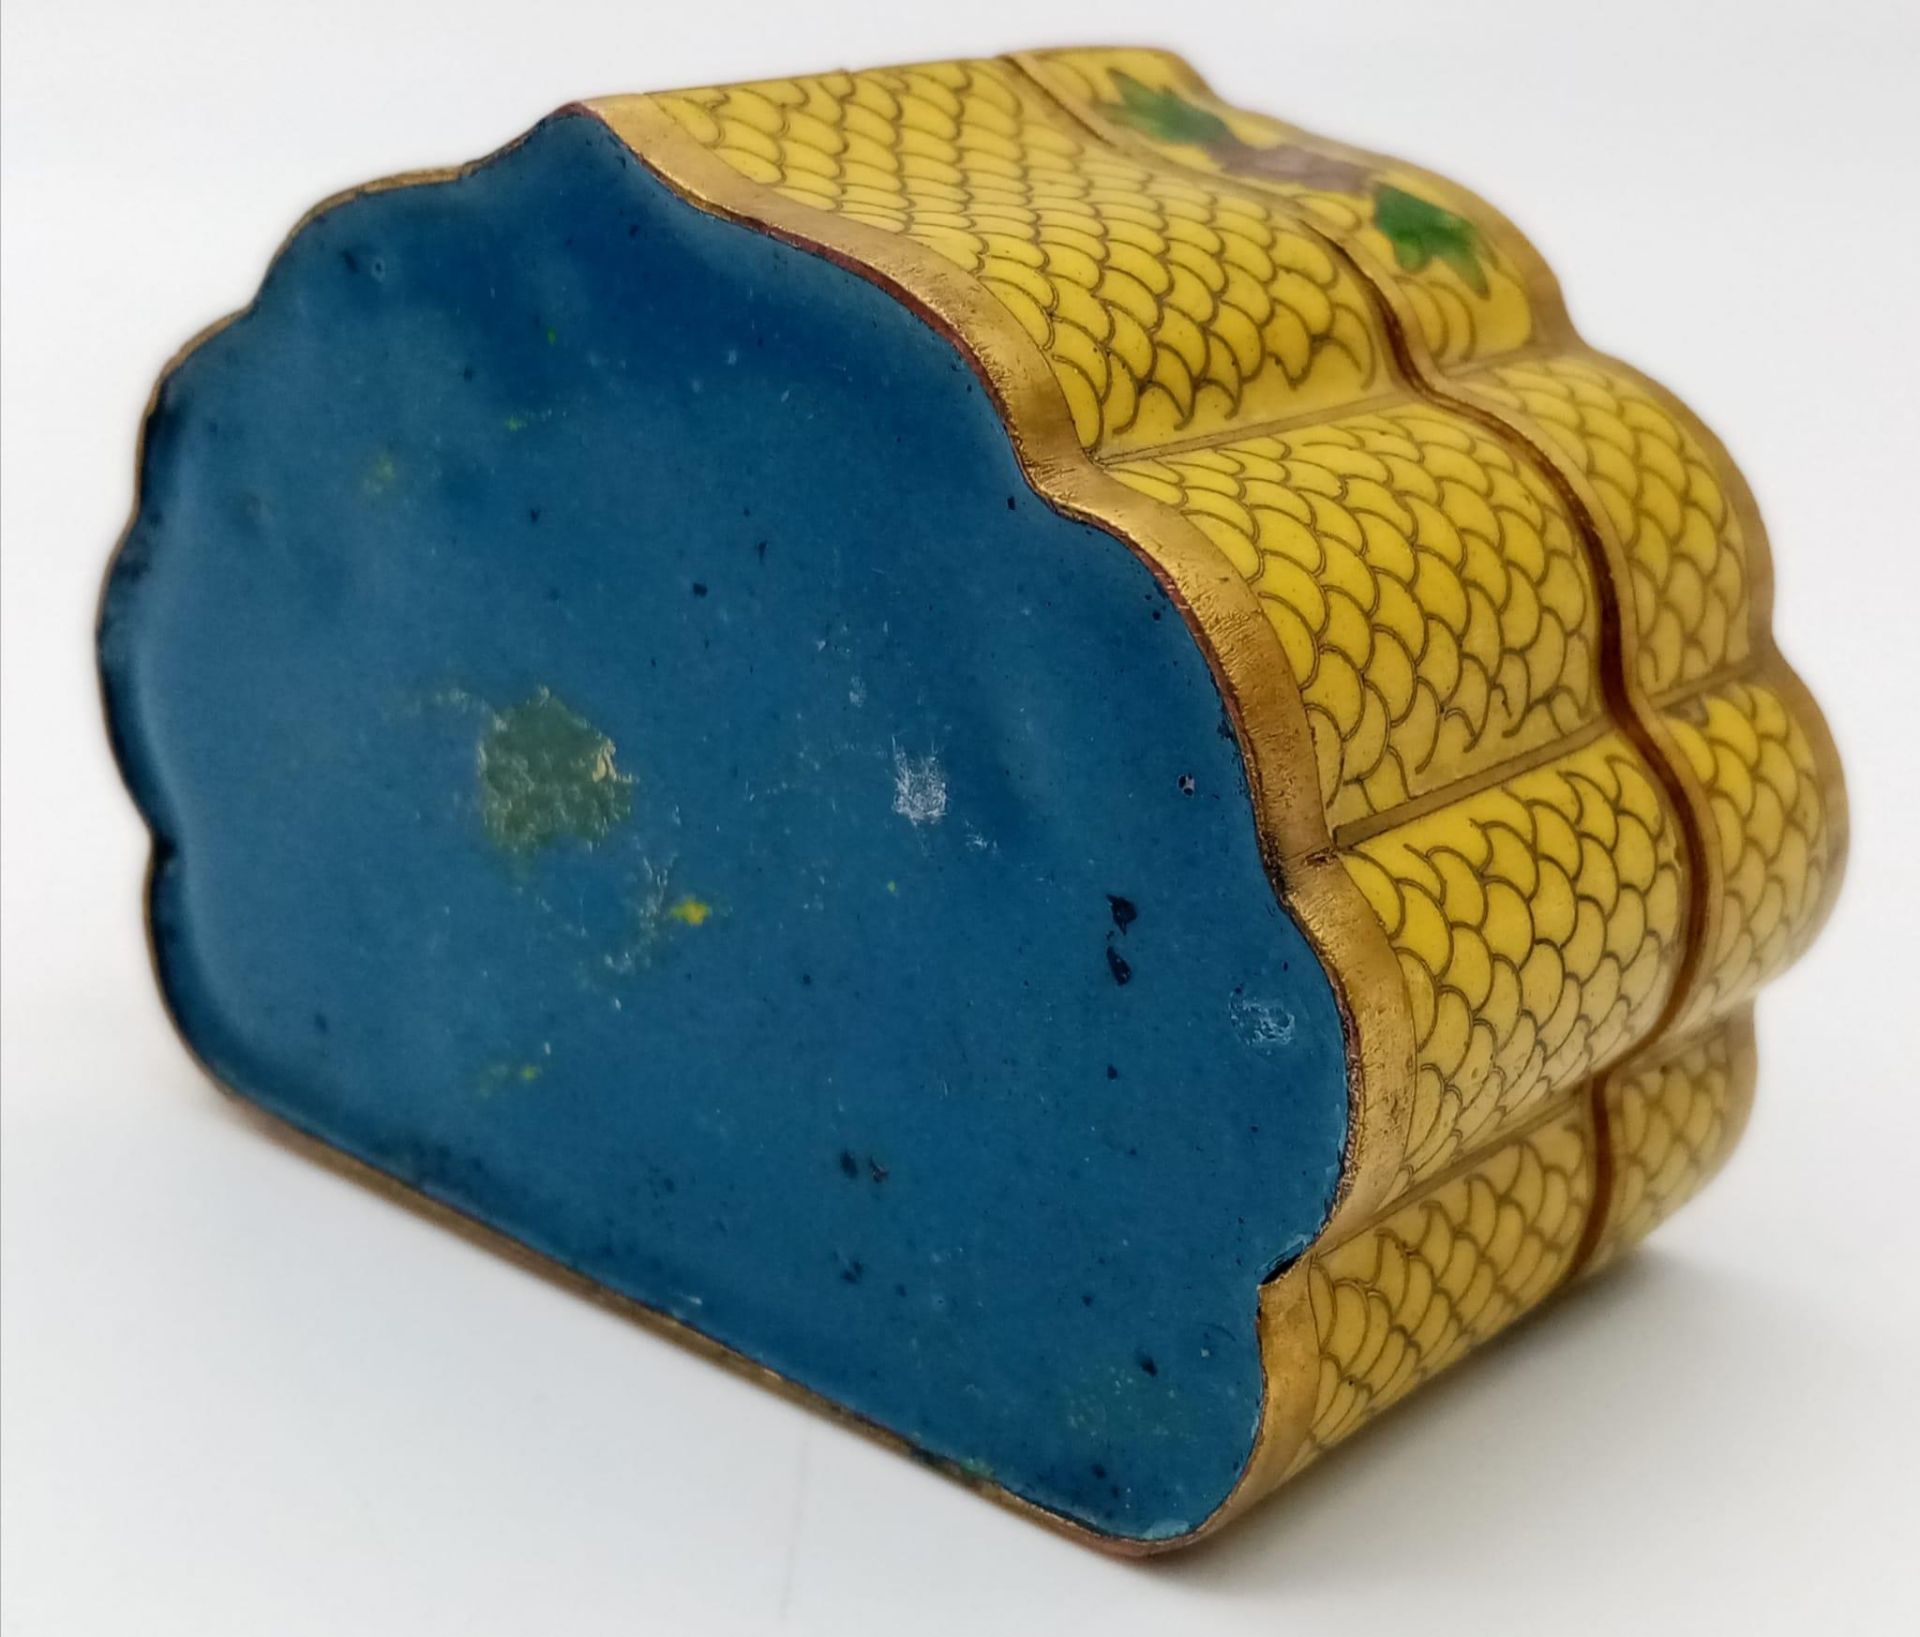 AN EXQUISITE EXAMPLE OF 19TH CENTURY CHINESE CLOISONNE WORK IN THE FORM OF A SMALL TRINKET BOX . - Image 4 of 5